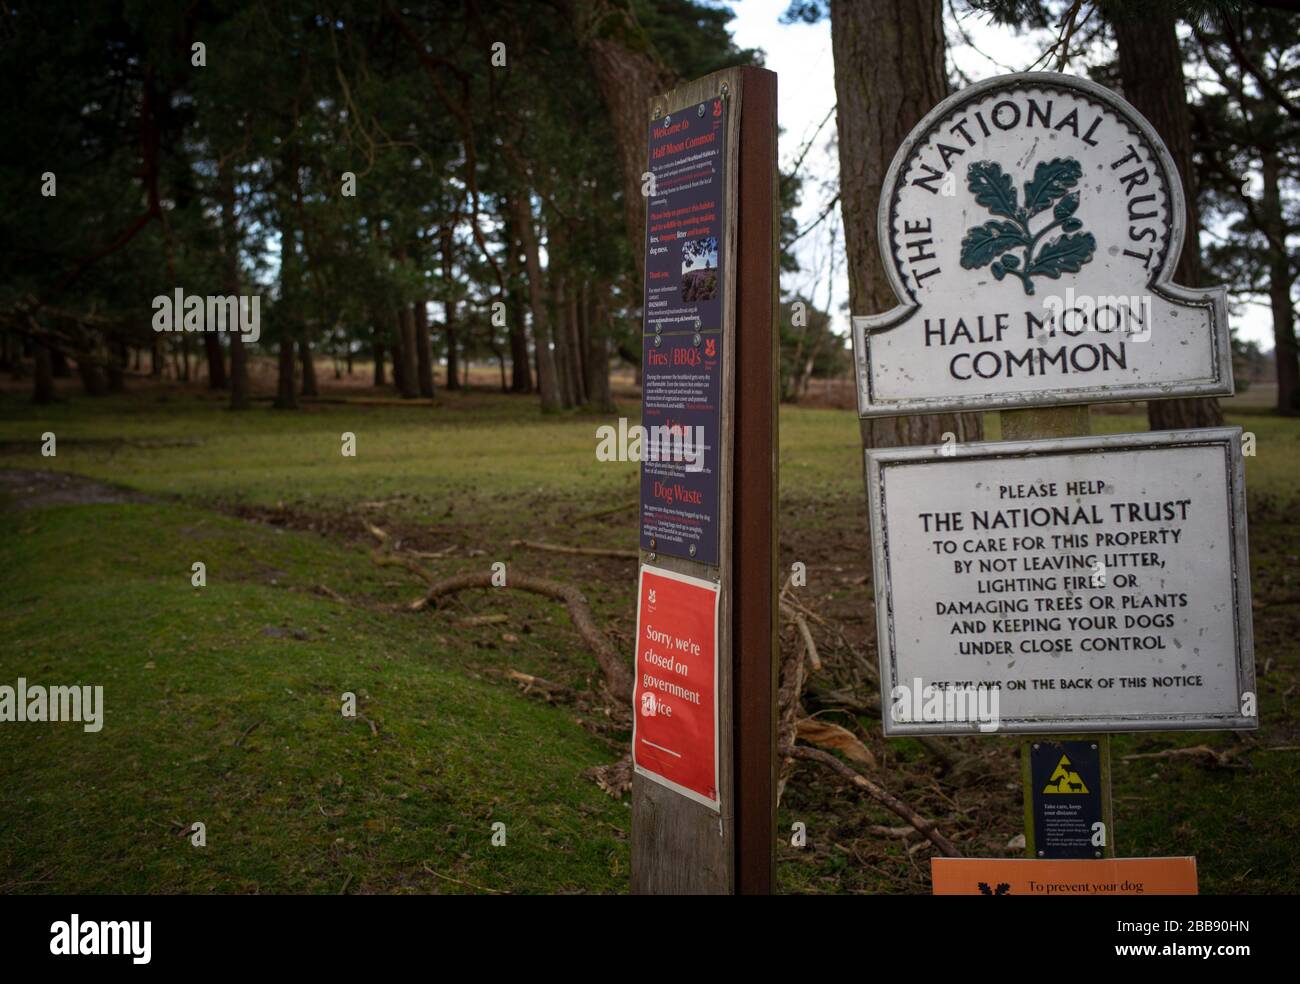 A sign on National trust land saying We are Closed on Government advice . The land is Half Moon Common on the edge of The New Forest Hampshire. Stock Photo